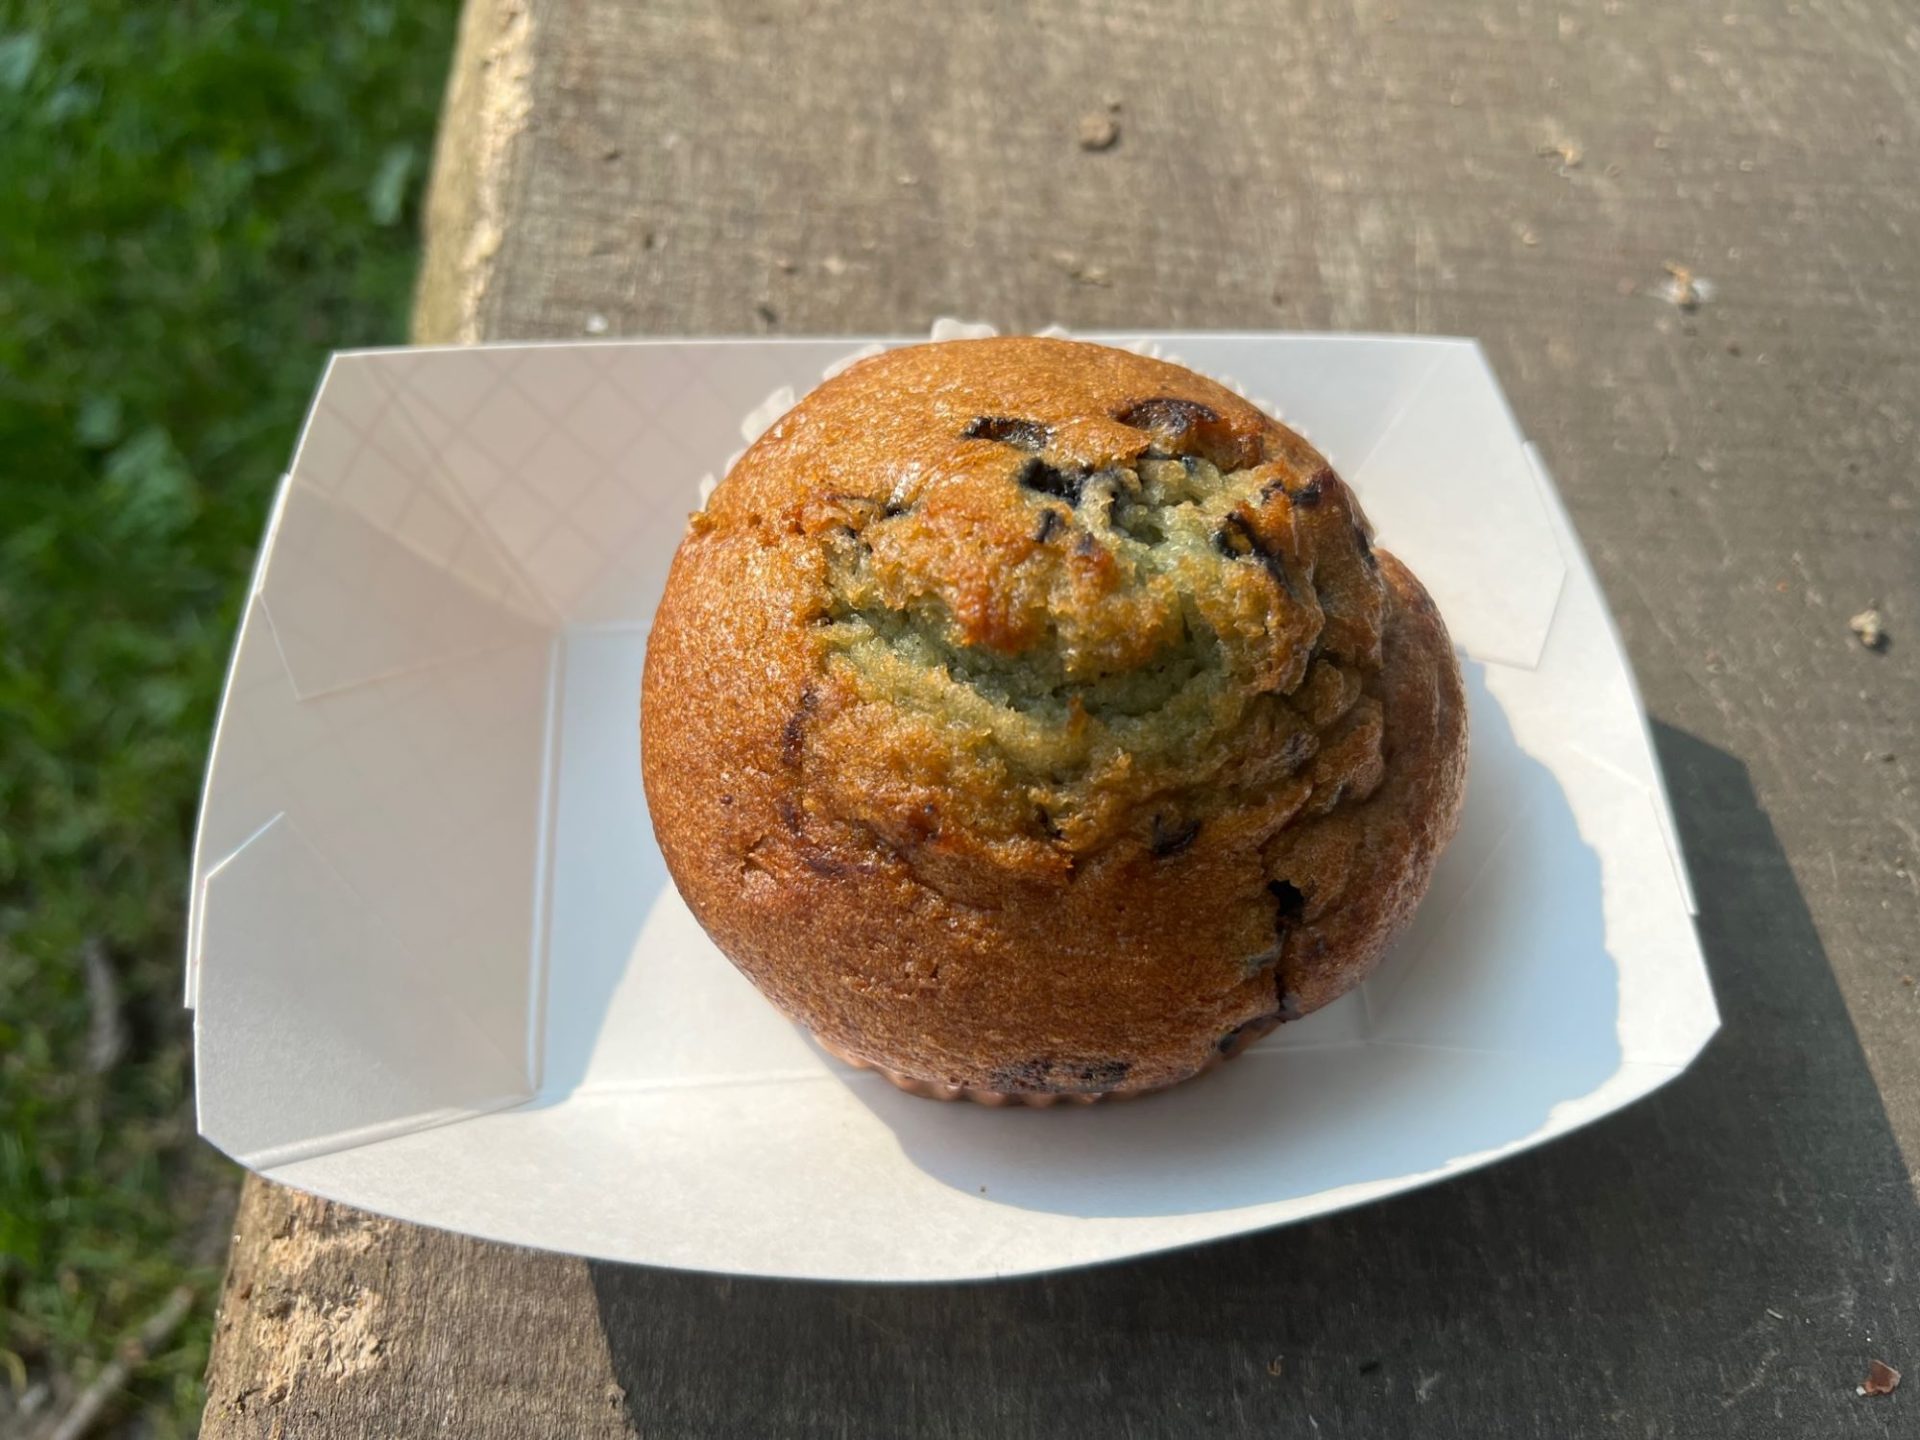 A blueberry muffin in a white cardboard container sits on a wooden bench.